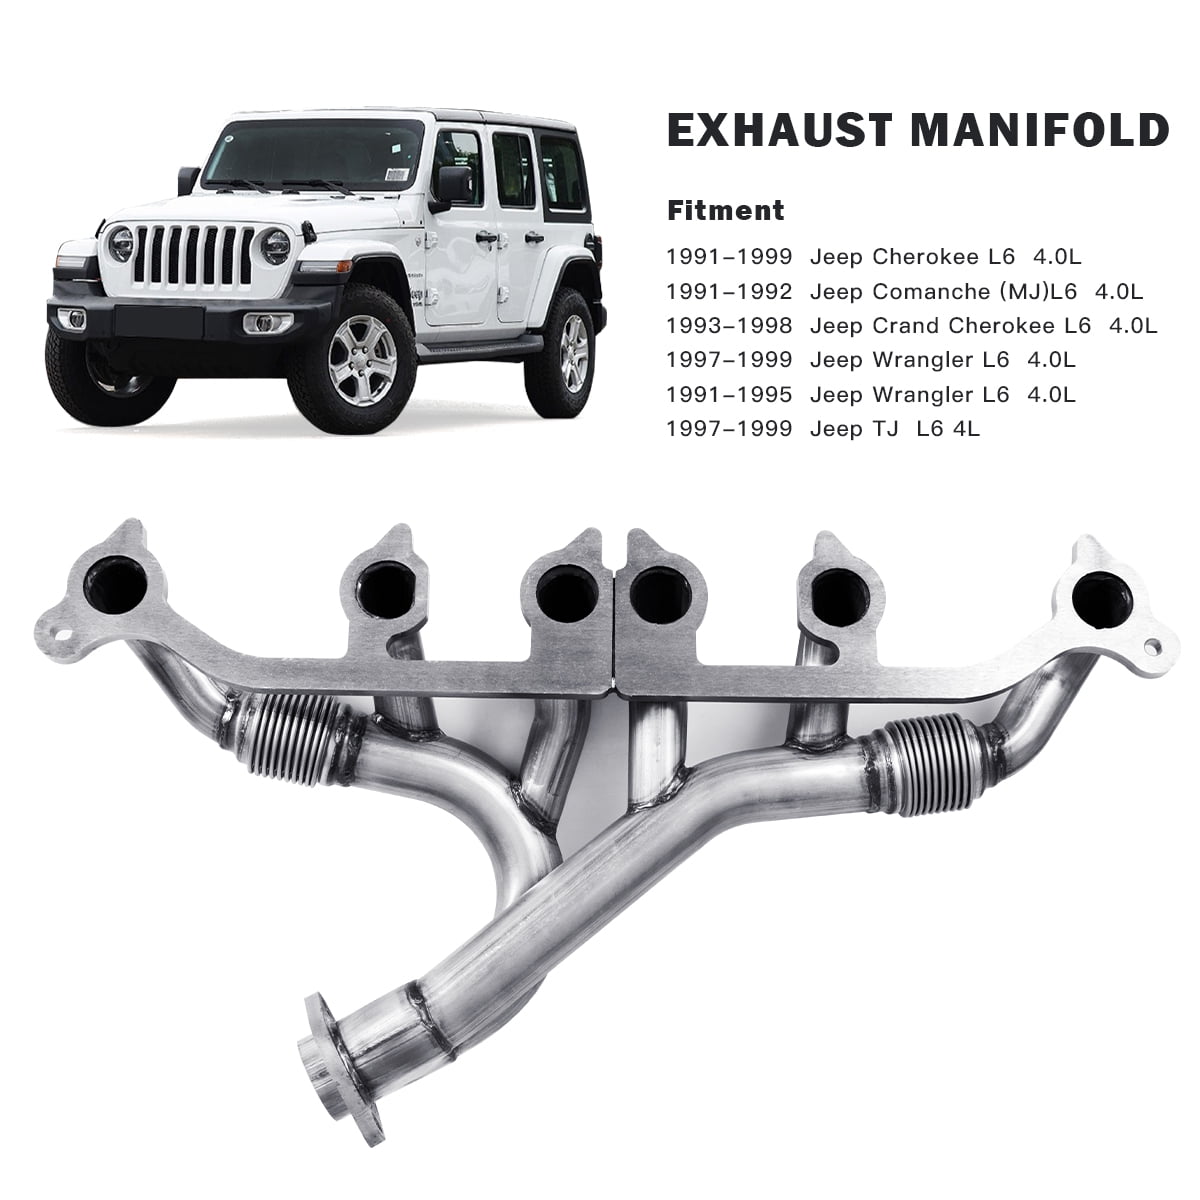 Costway Exhaust Manifold Kits Set Stainless Steel for Jeep Wrangler Grand  Cherokee  